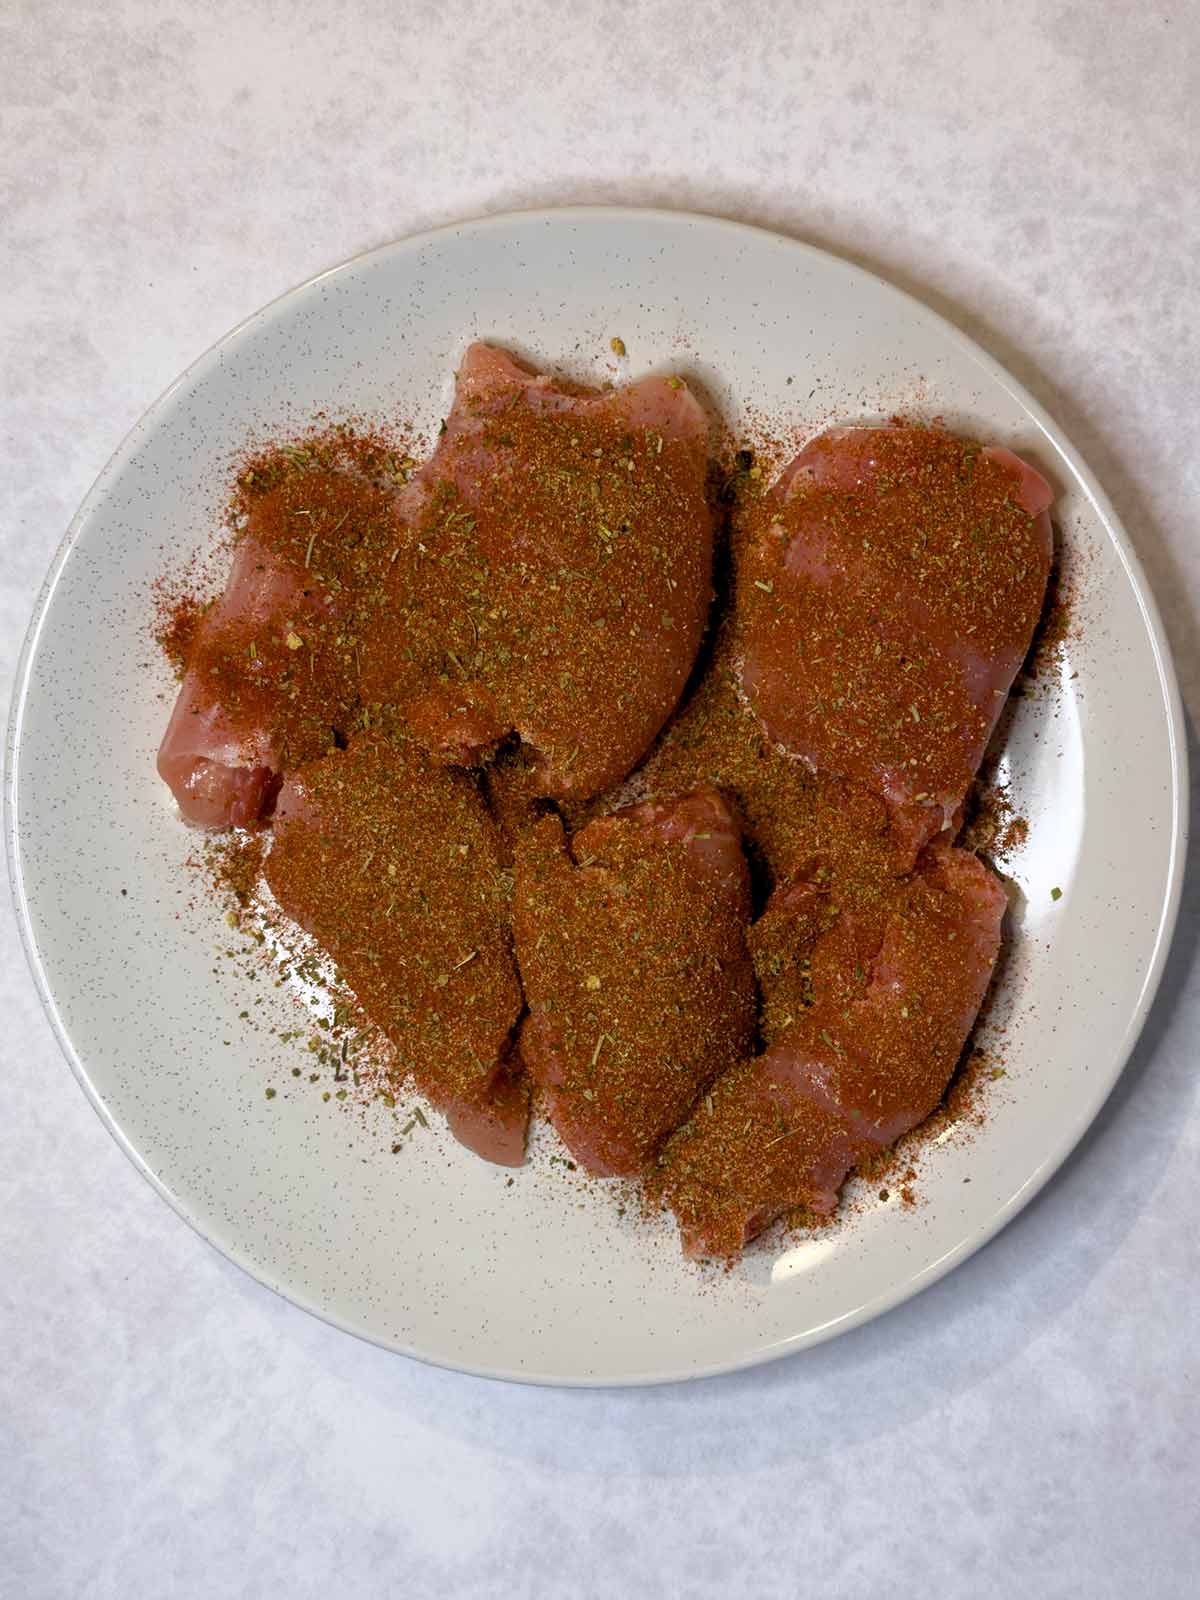 Raw chicken thighs coated in a spice rub.